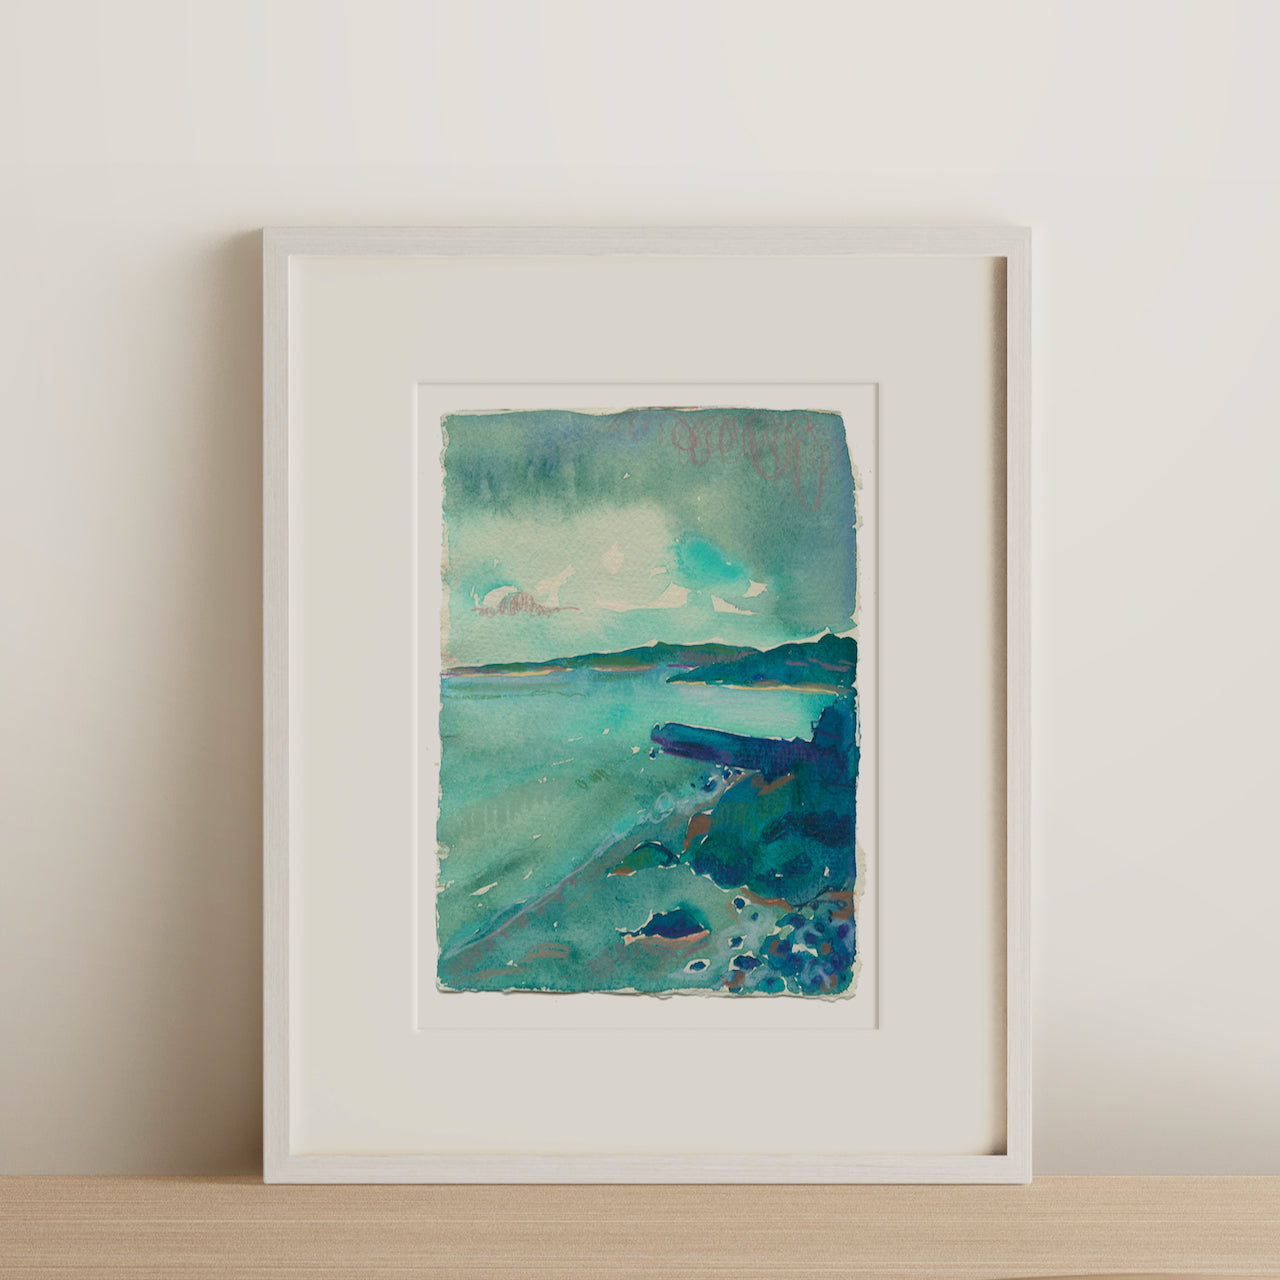 Framed Lucy Innes Williams painting seascape and headland painting in tones of blue and turquoise